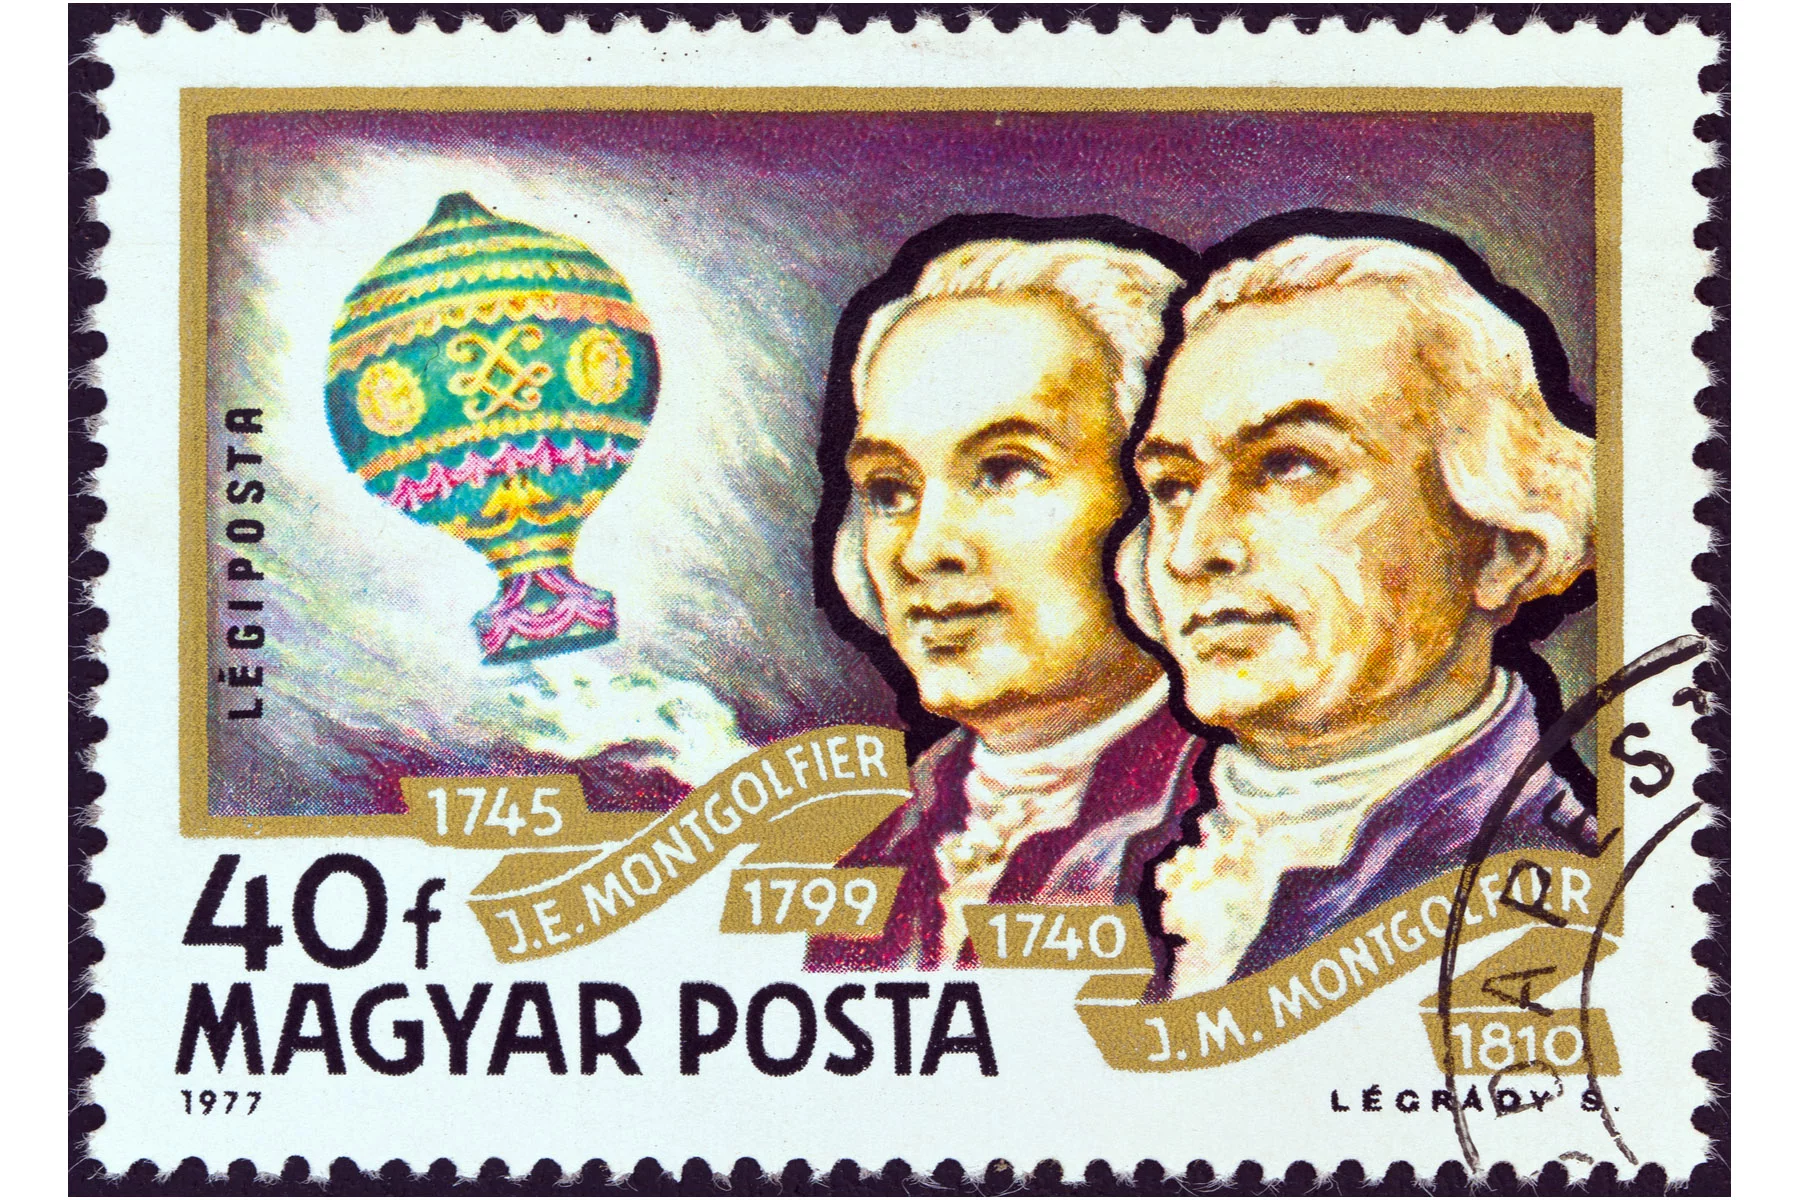 The Montgolfier brothers on a Hungarian postage stamp